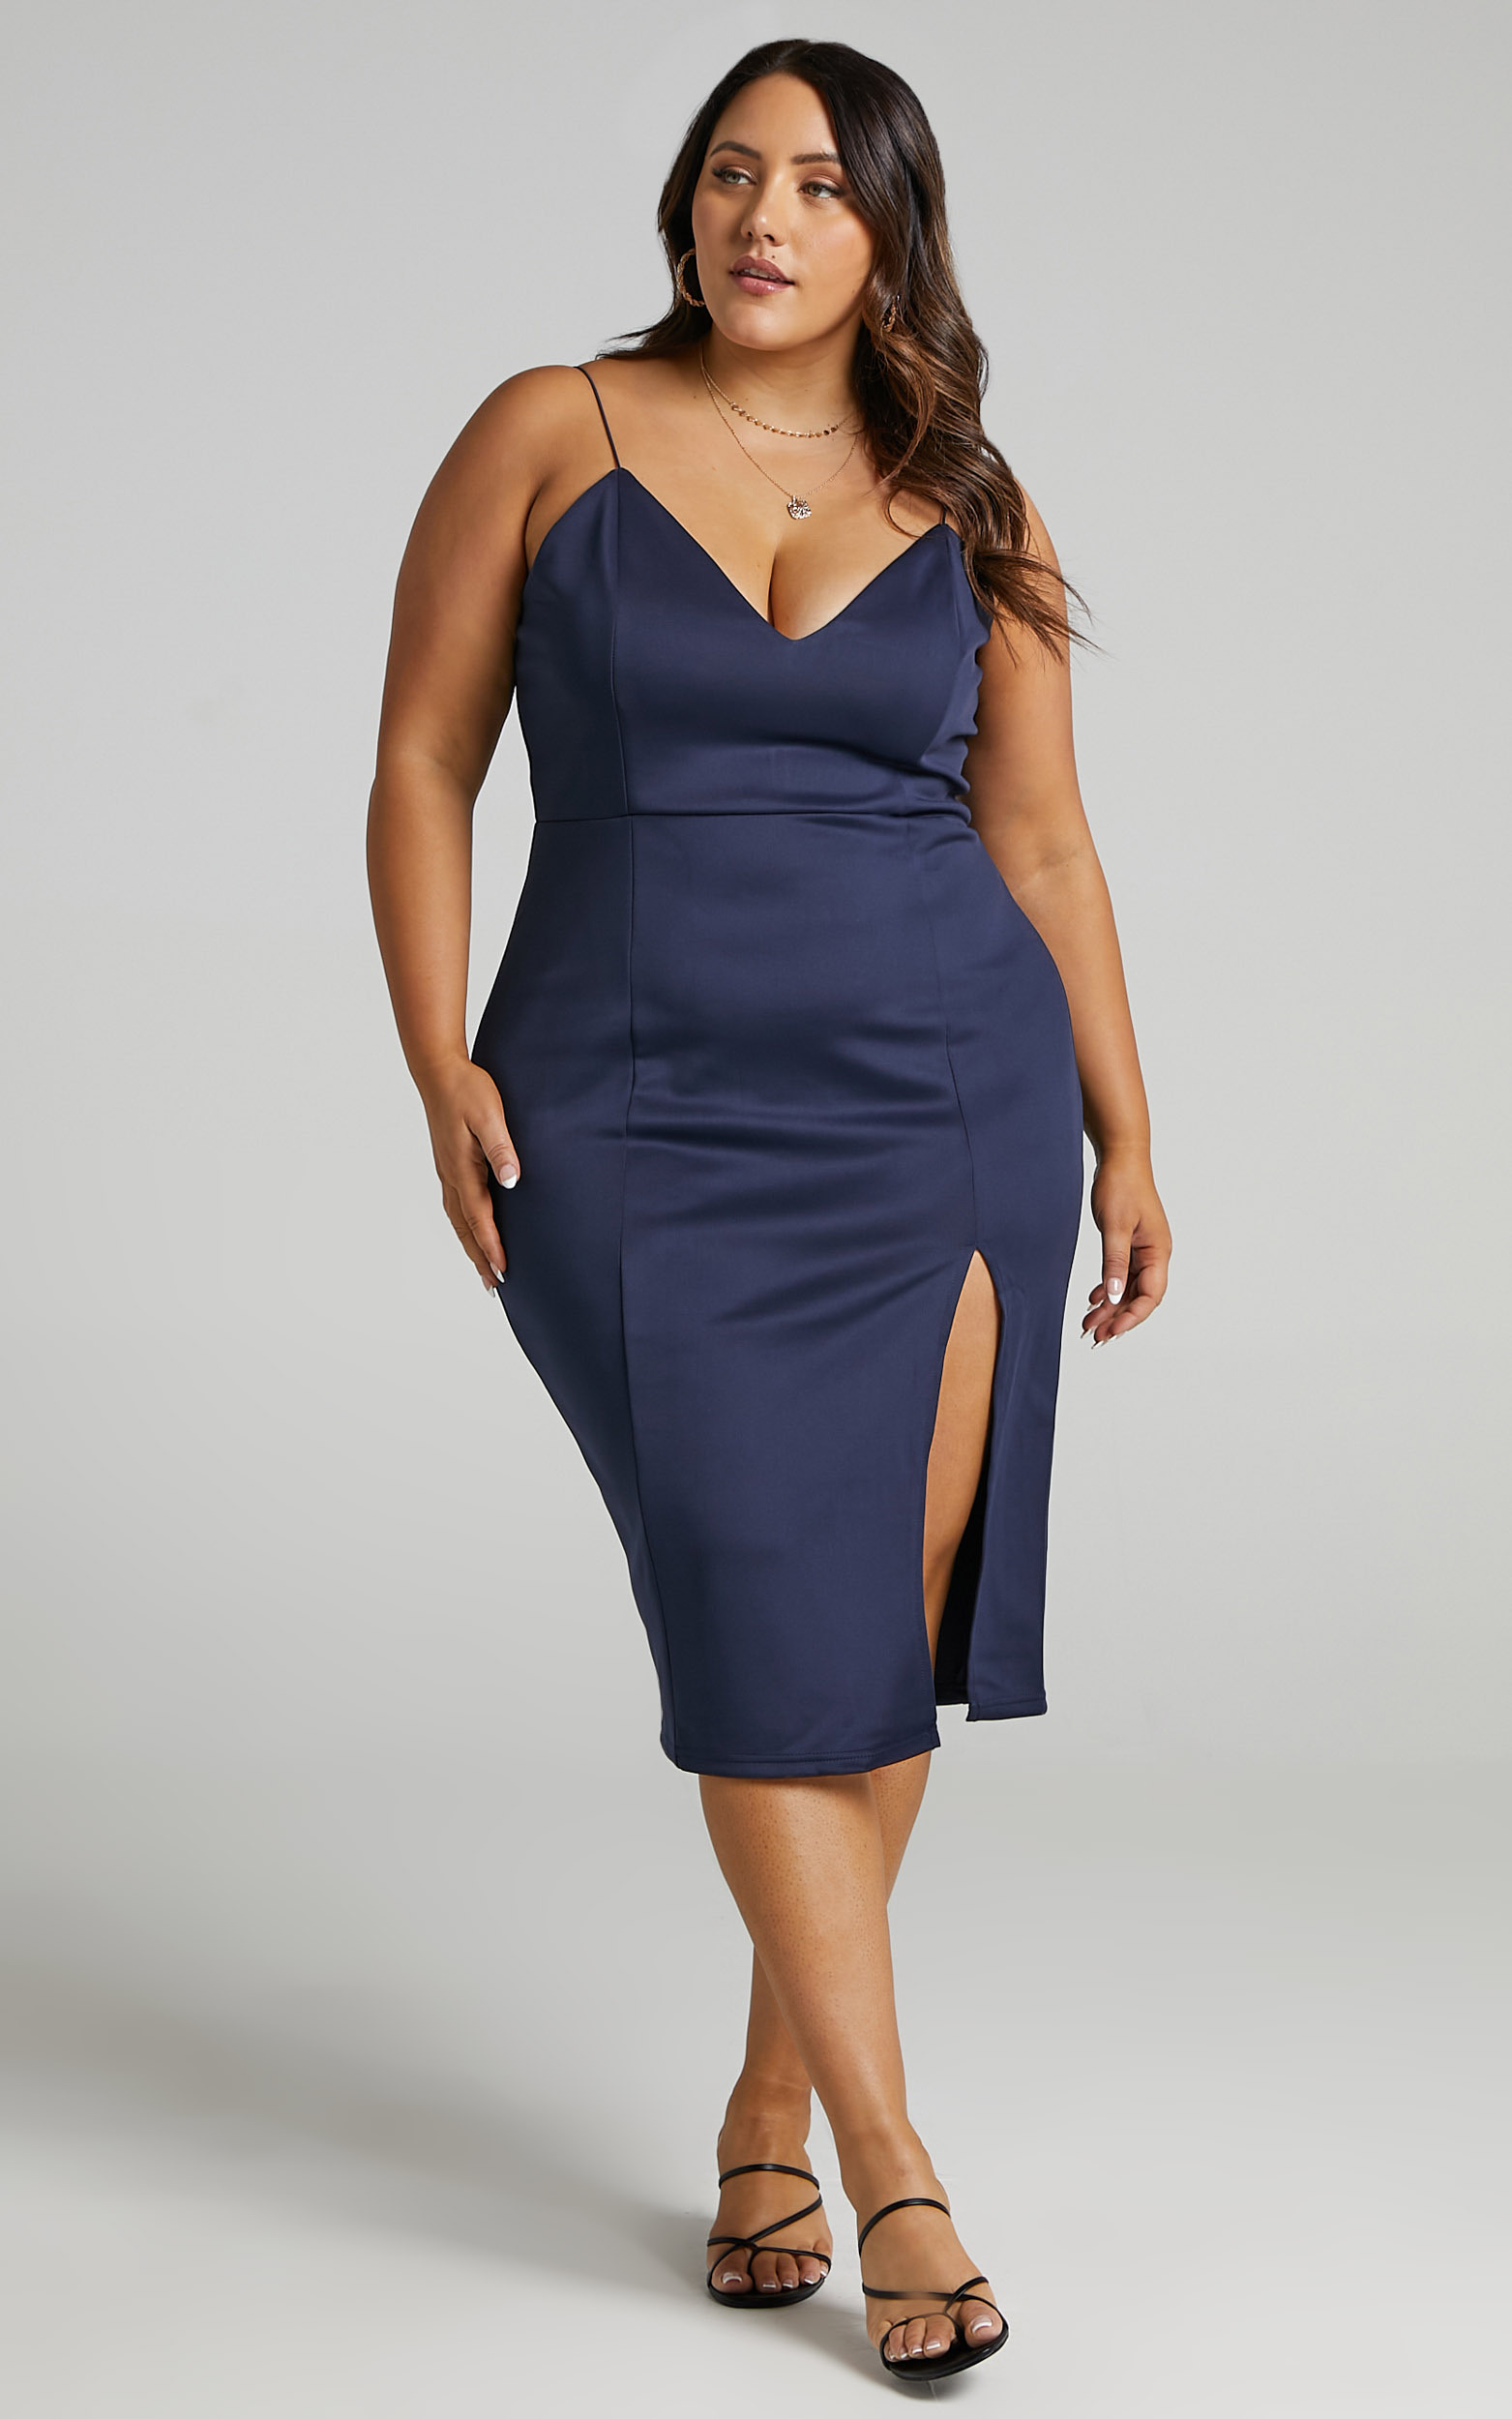 Big Ideas Midi Dress in Navy - 20, NVY3, hi-res image number null